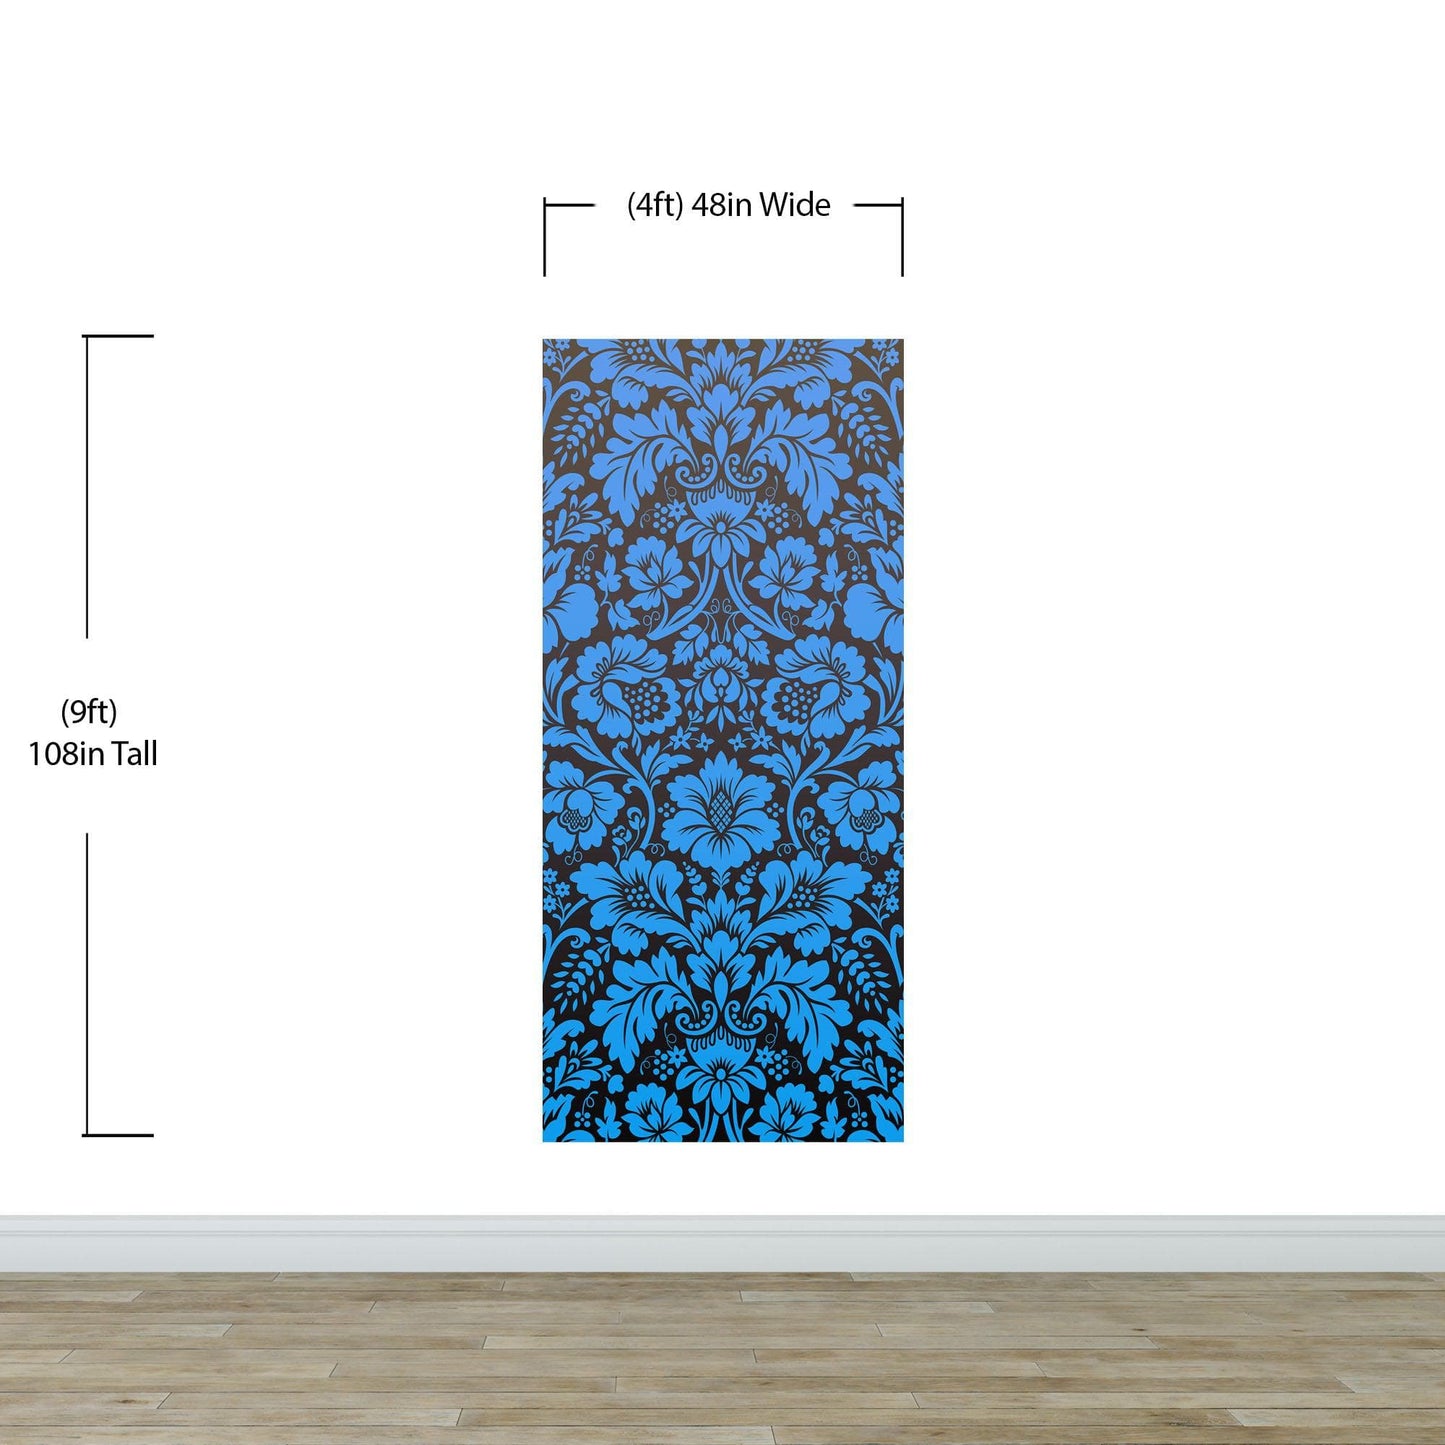 Damask Wallpaper Blue Color on Dark Background Pattern Wallpaper Peel and Stick Wall Mural Home Decor #6518